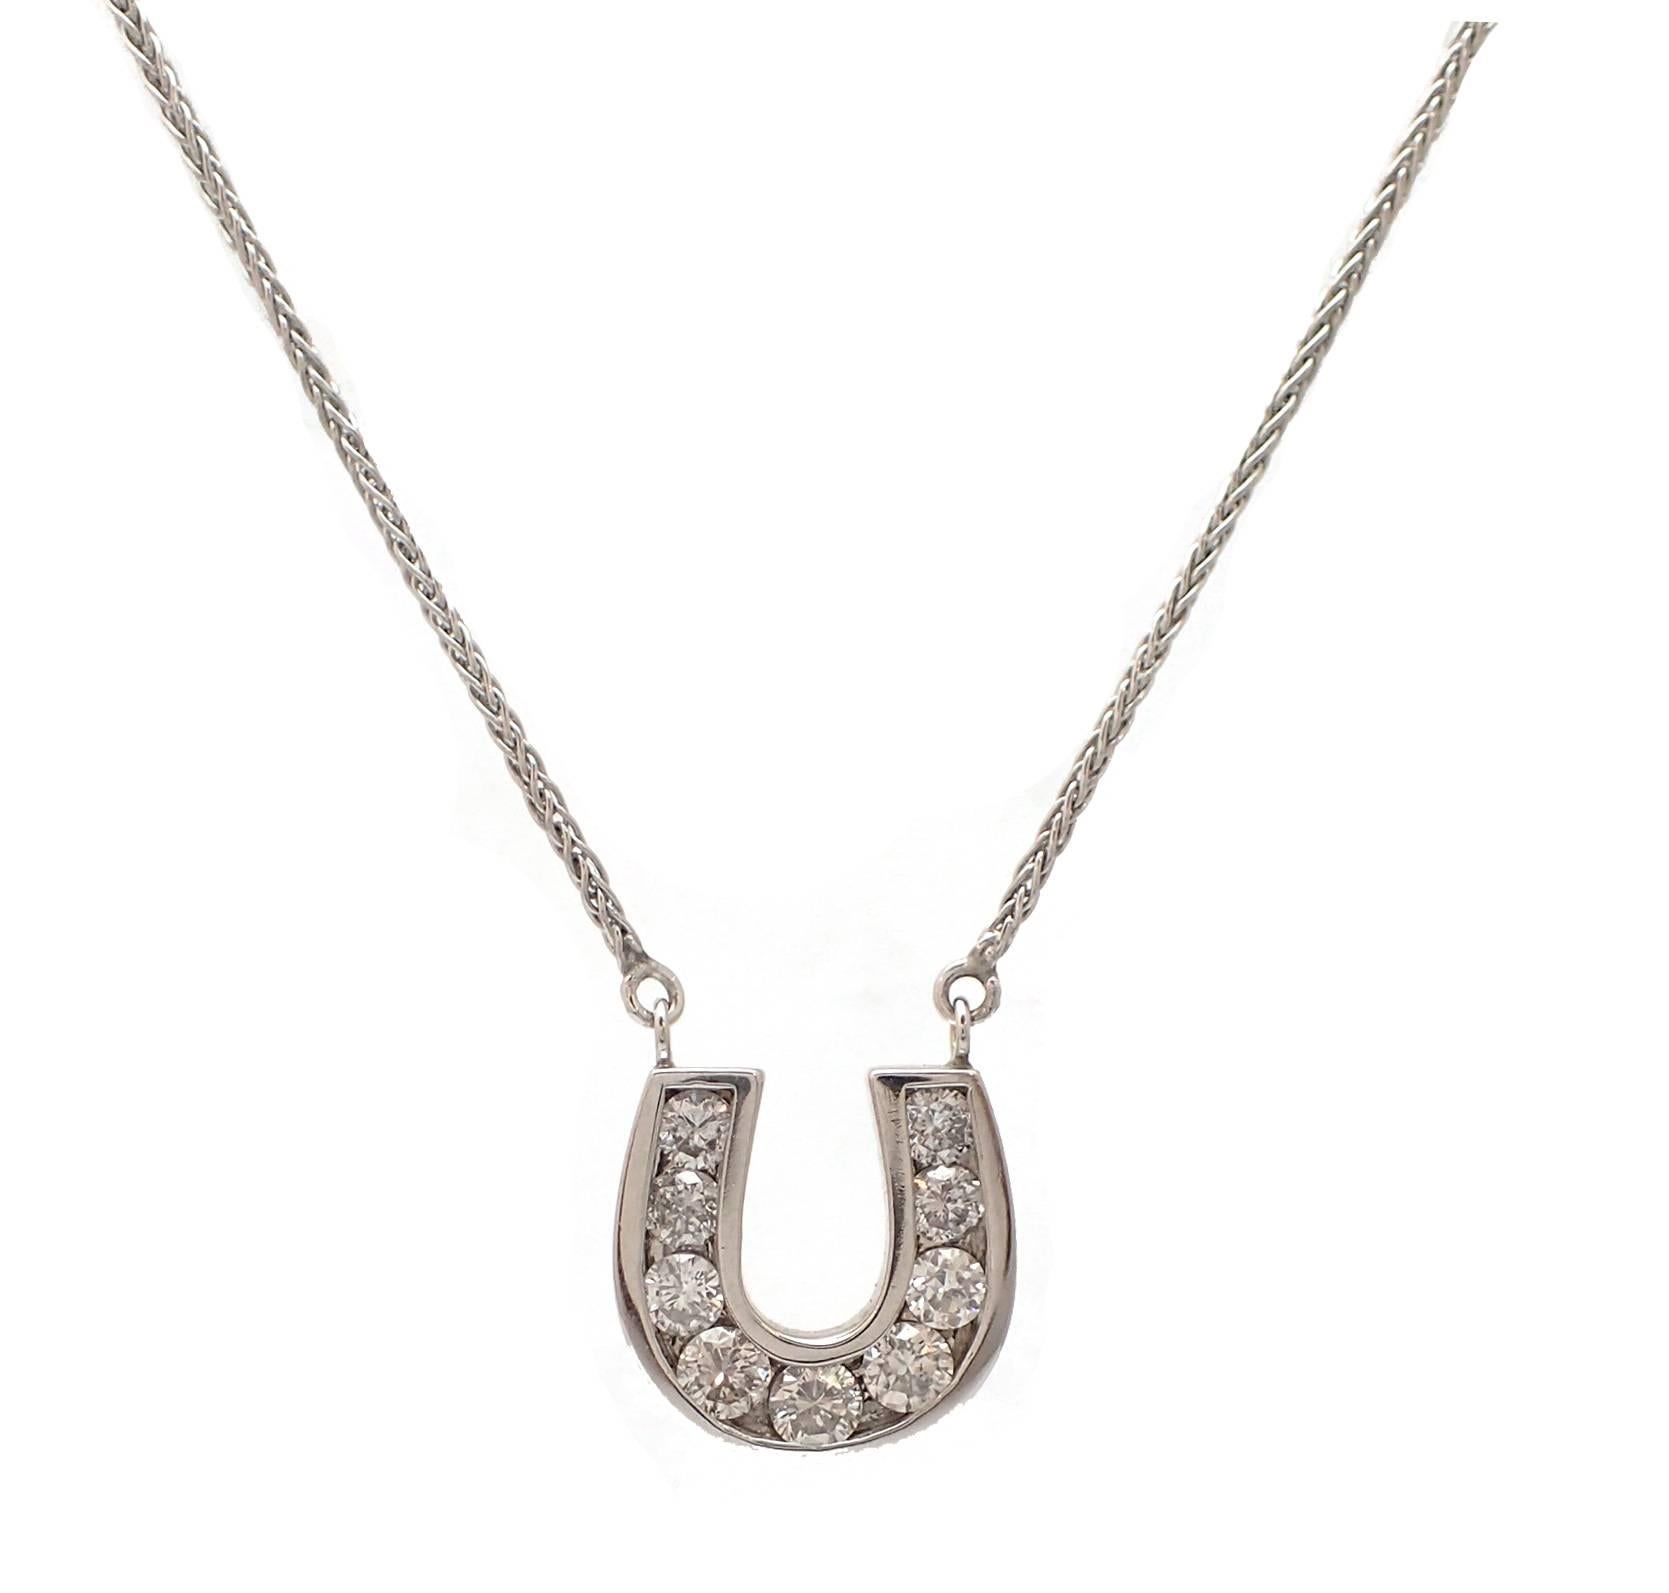 Bringing the horseshoe to the next level, this stunning pendant is perfect for the horse lover AND jewelry lover. This necklace, in 14K white gold, features 9 round brilliant diamonds weighing over one carat in total weight. The diamond horseshoe is